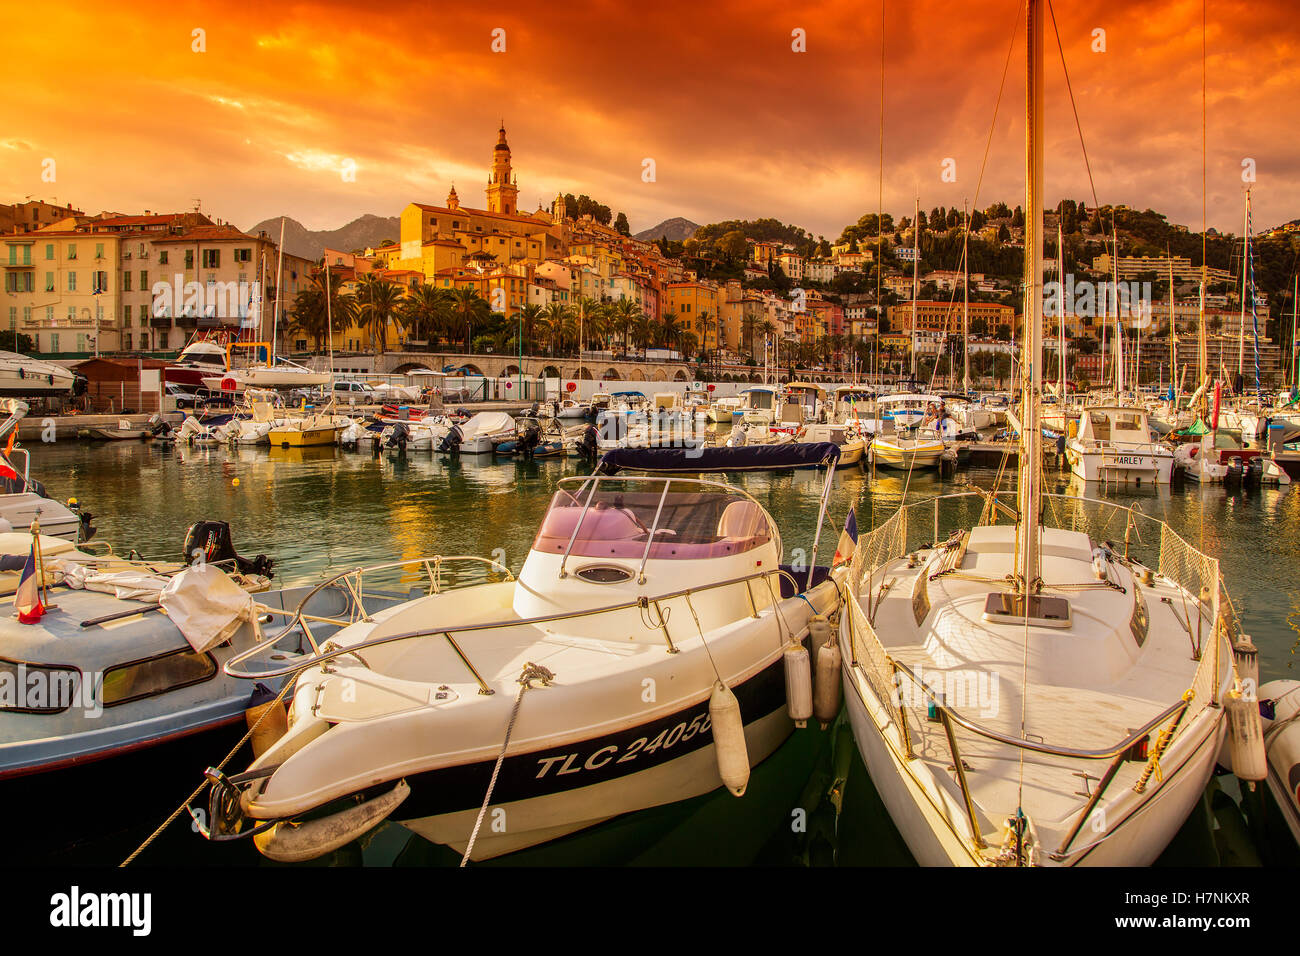 Marina and Old Town with the Basilique of Saint Michel Archange. Menton. Provence Alpes Cote d'Azur. French Riviera. France. Stock Photo